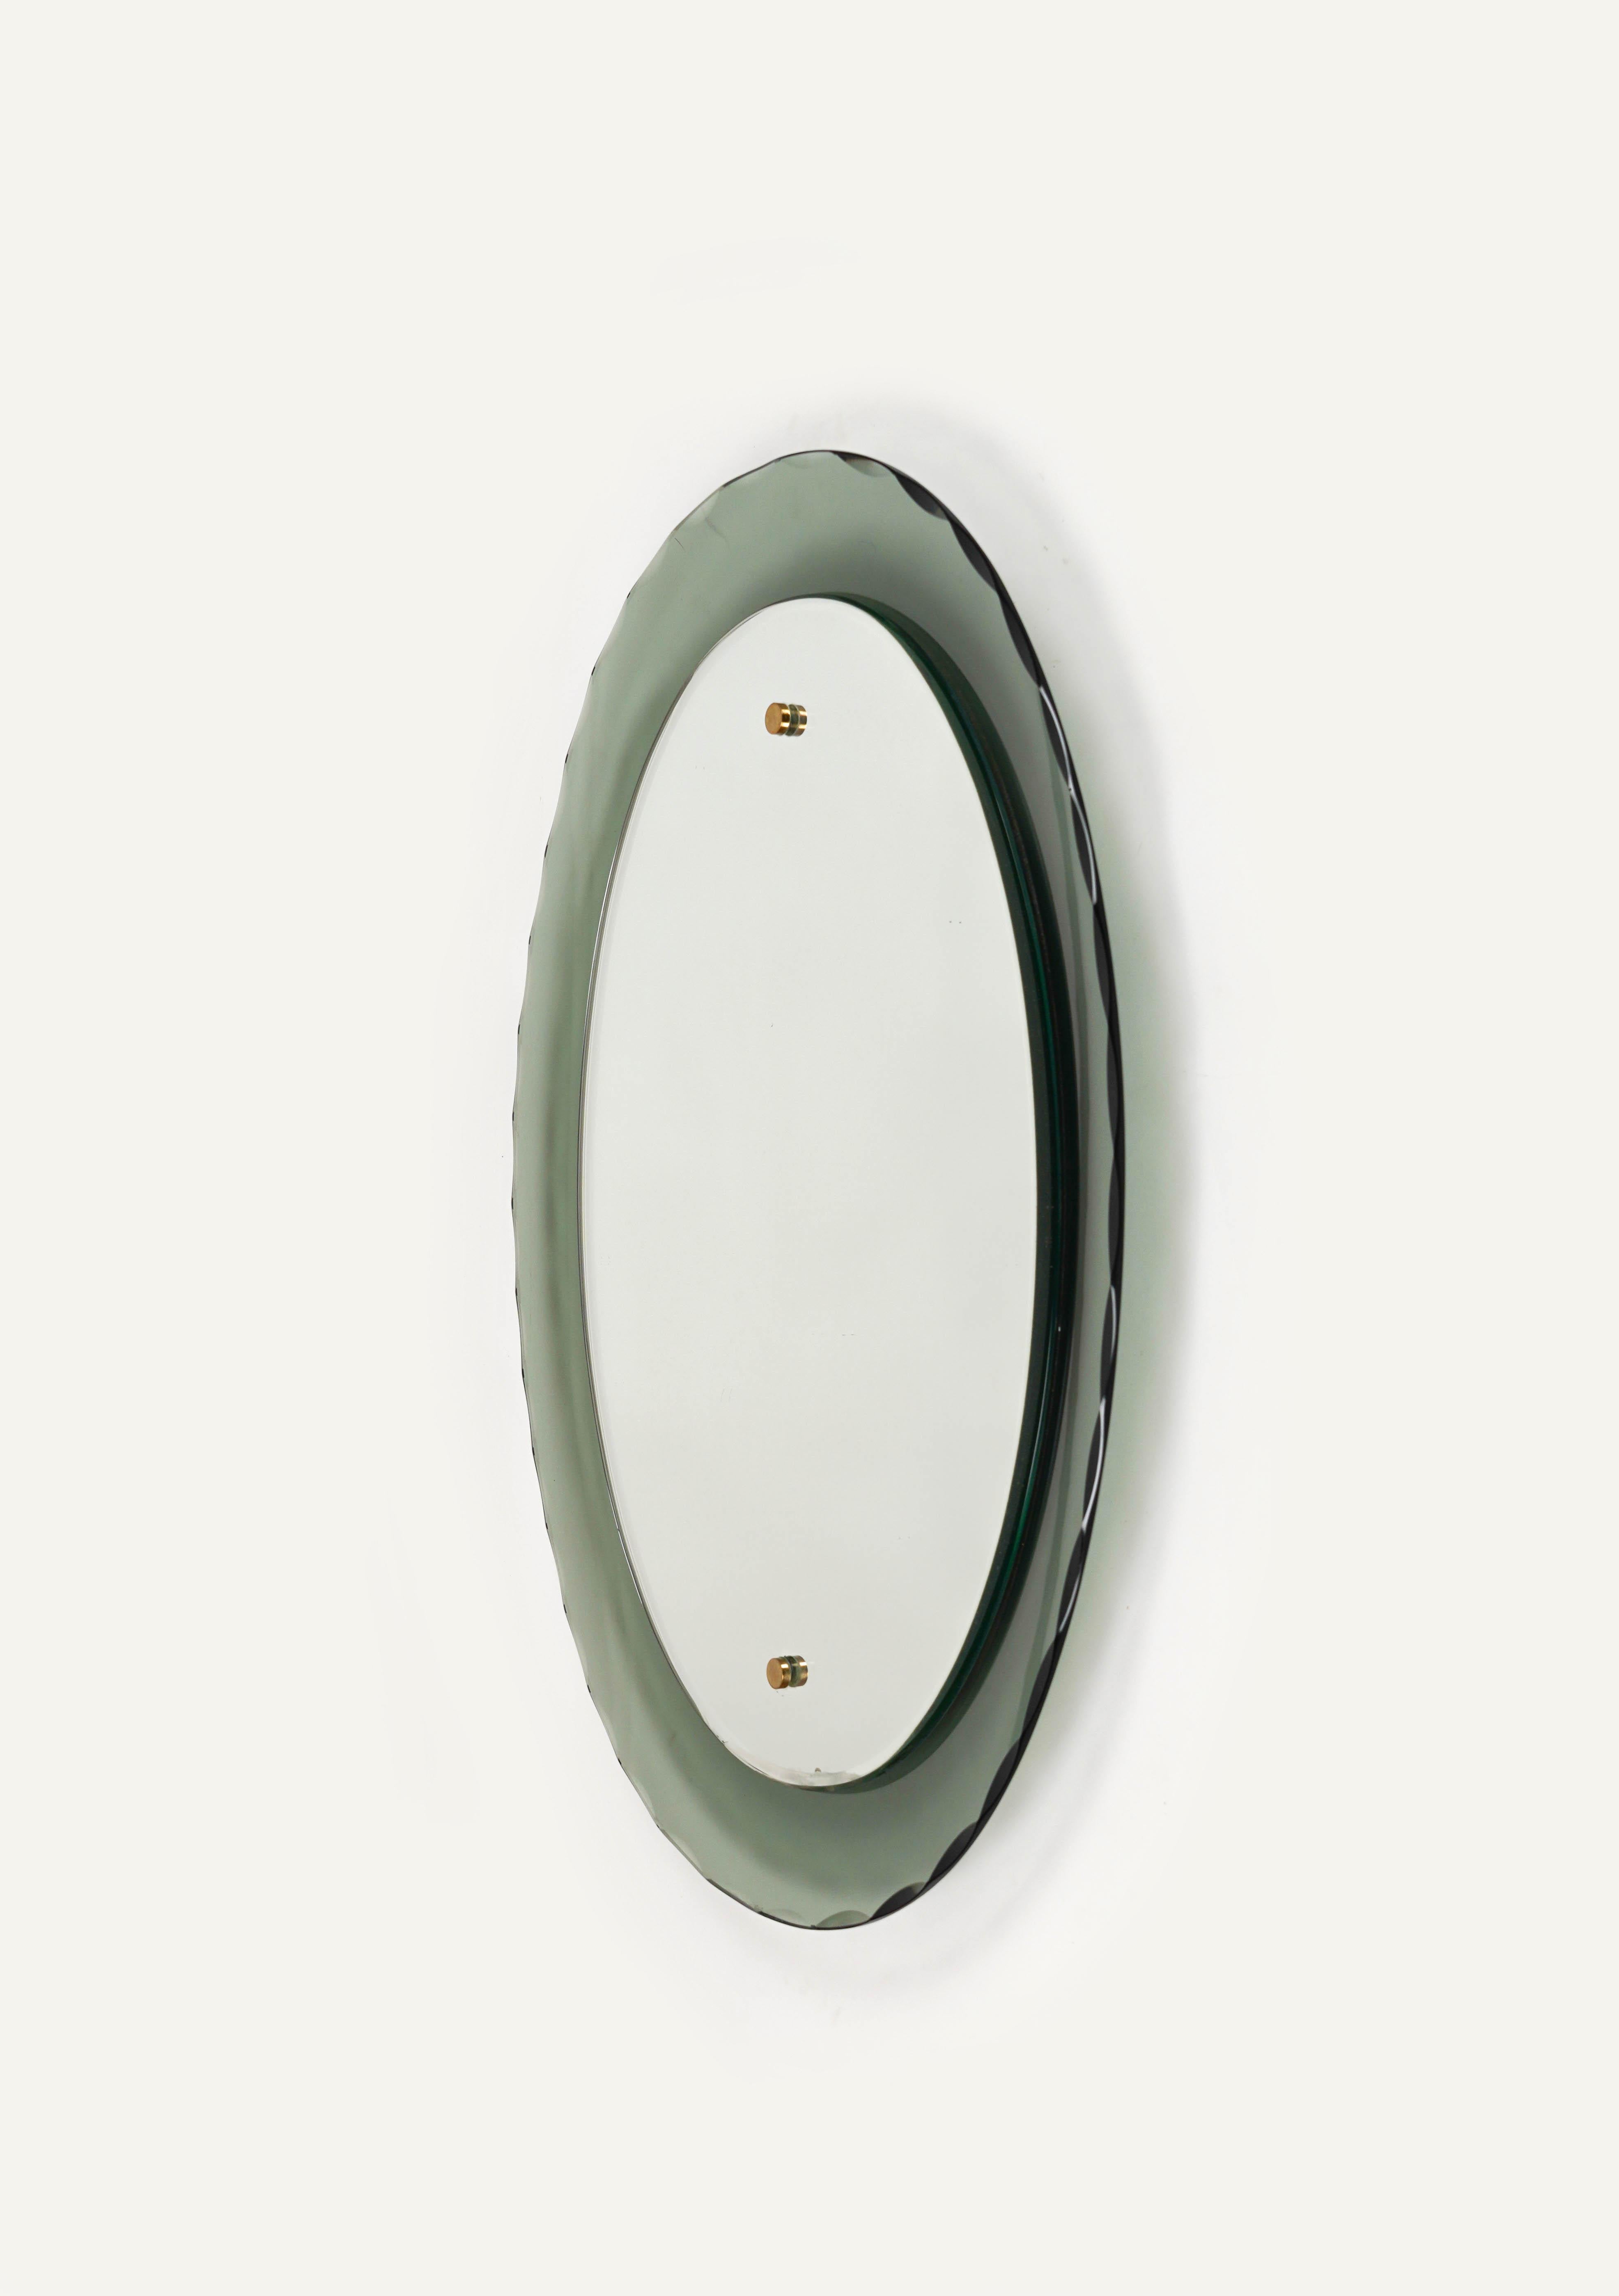 Midcentury Oval Wall Mirror whit Smoked Glass Frame by Cristal Arte, Italy 1960s For Sale 2